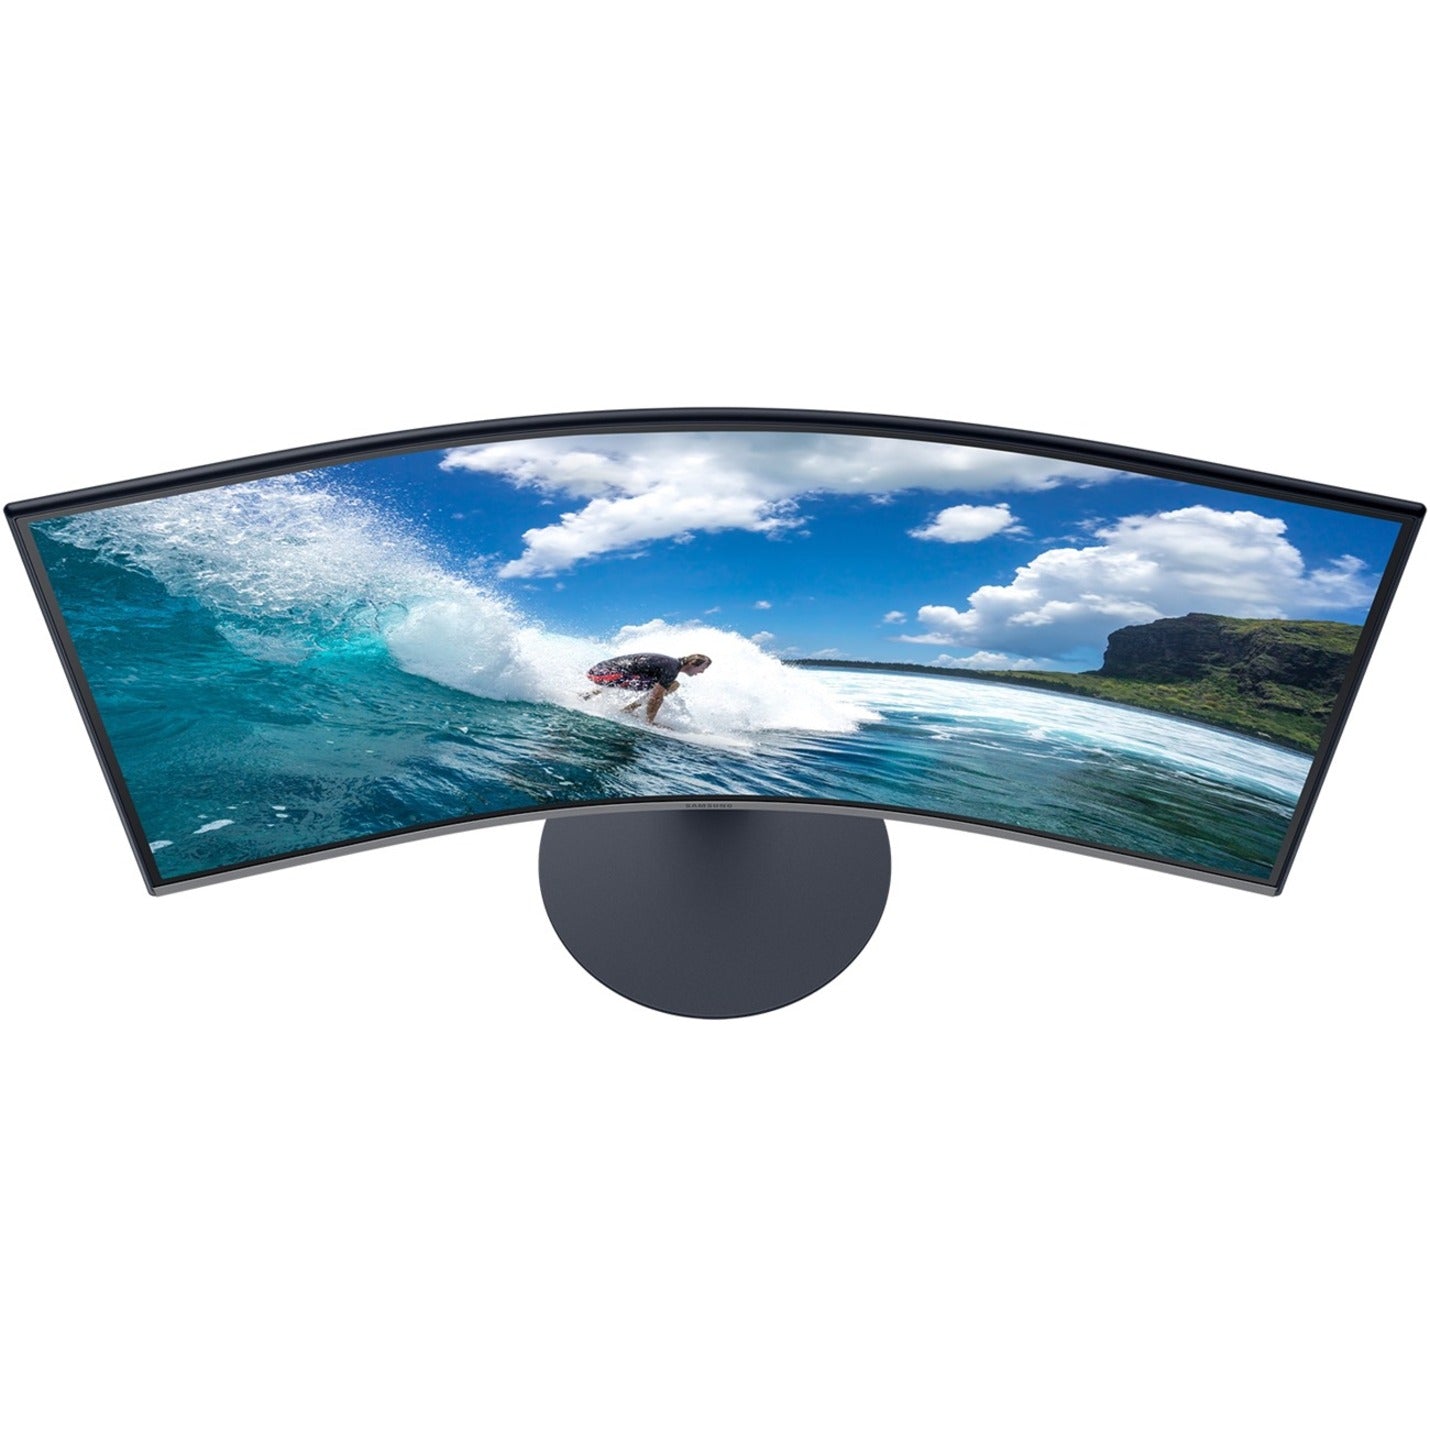 Samsung LC32T550FDNXZA 32" T55 Curved Monitor, Full HD, 75 Hz Refresh Rate, FreeSync